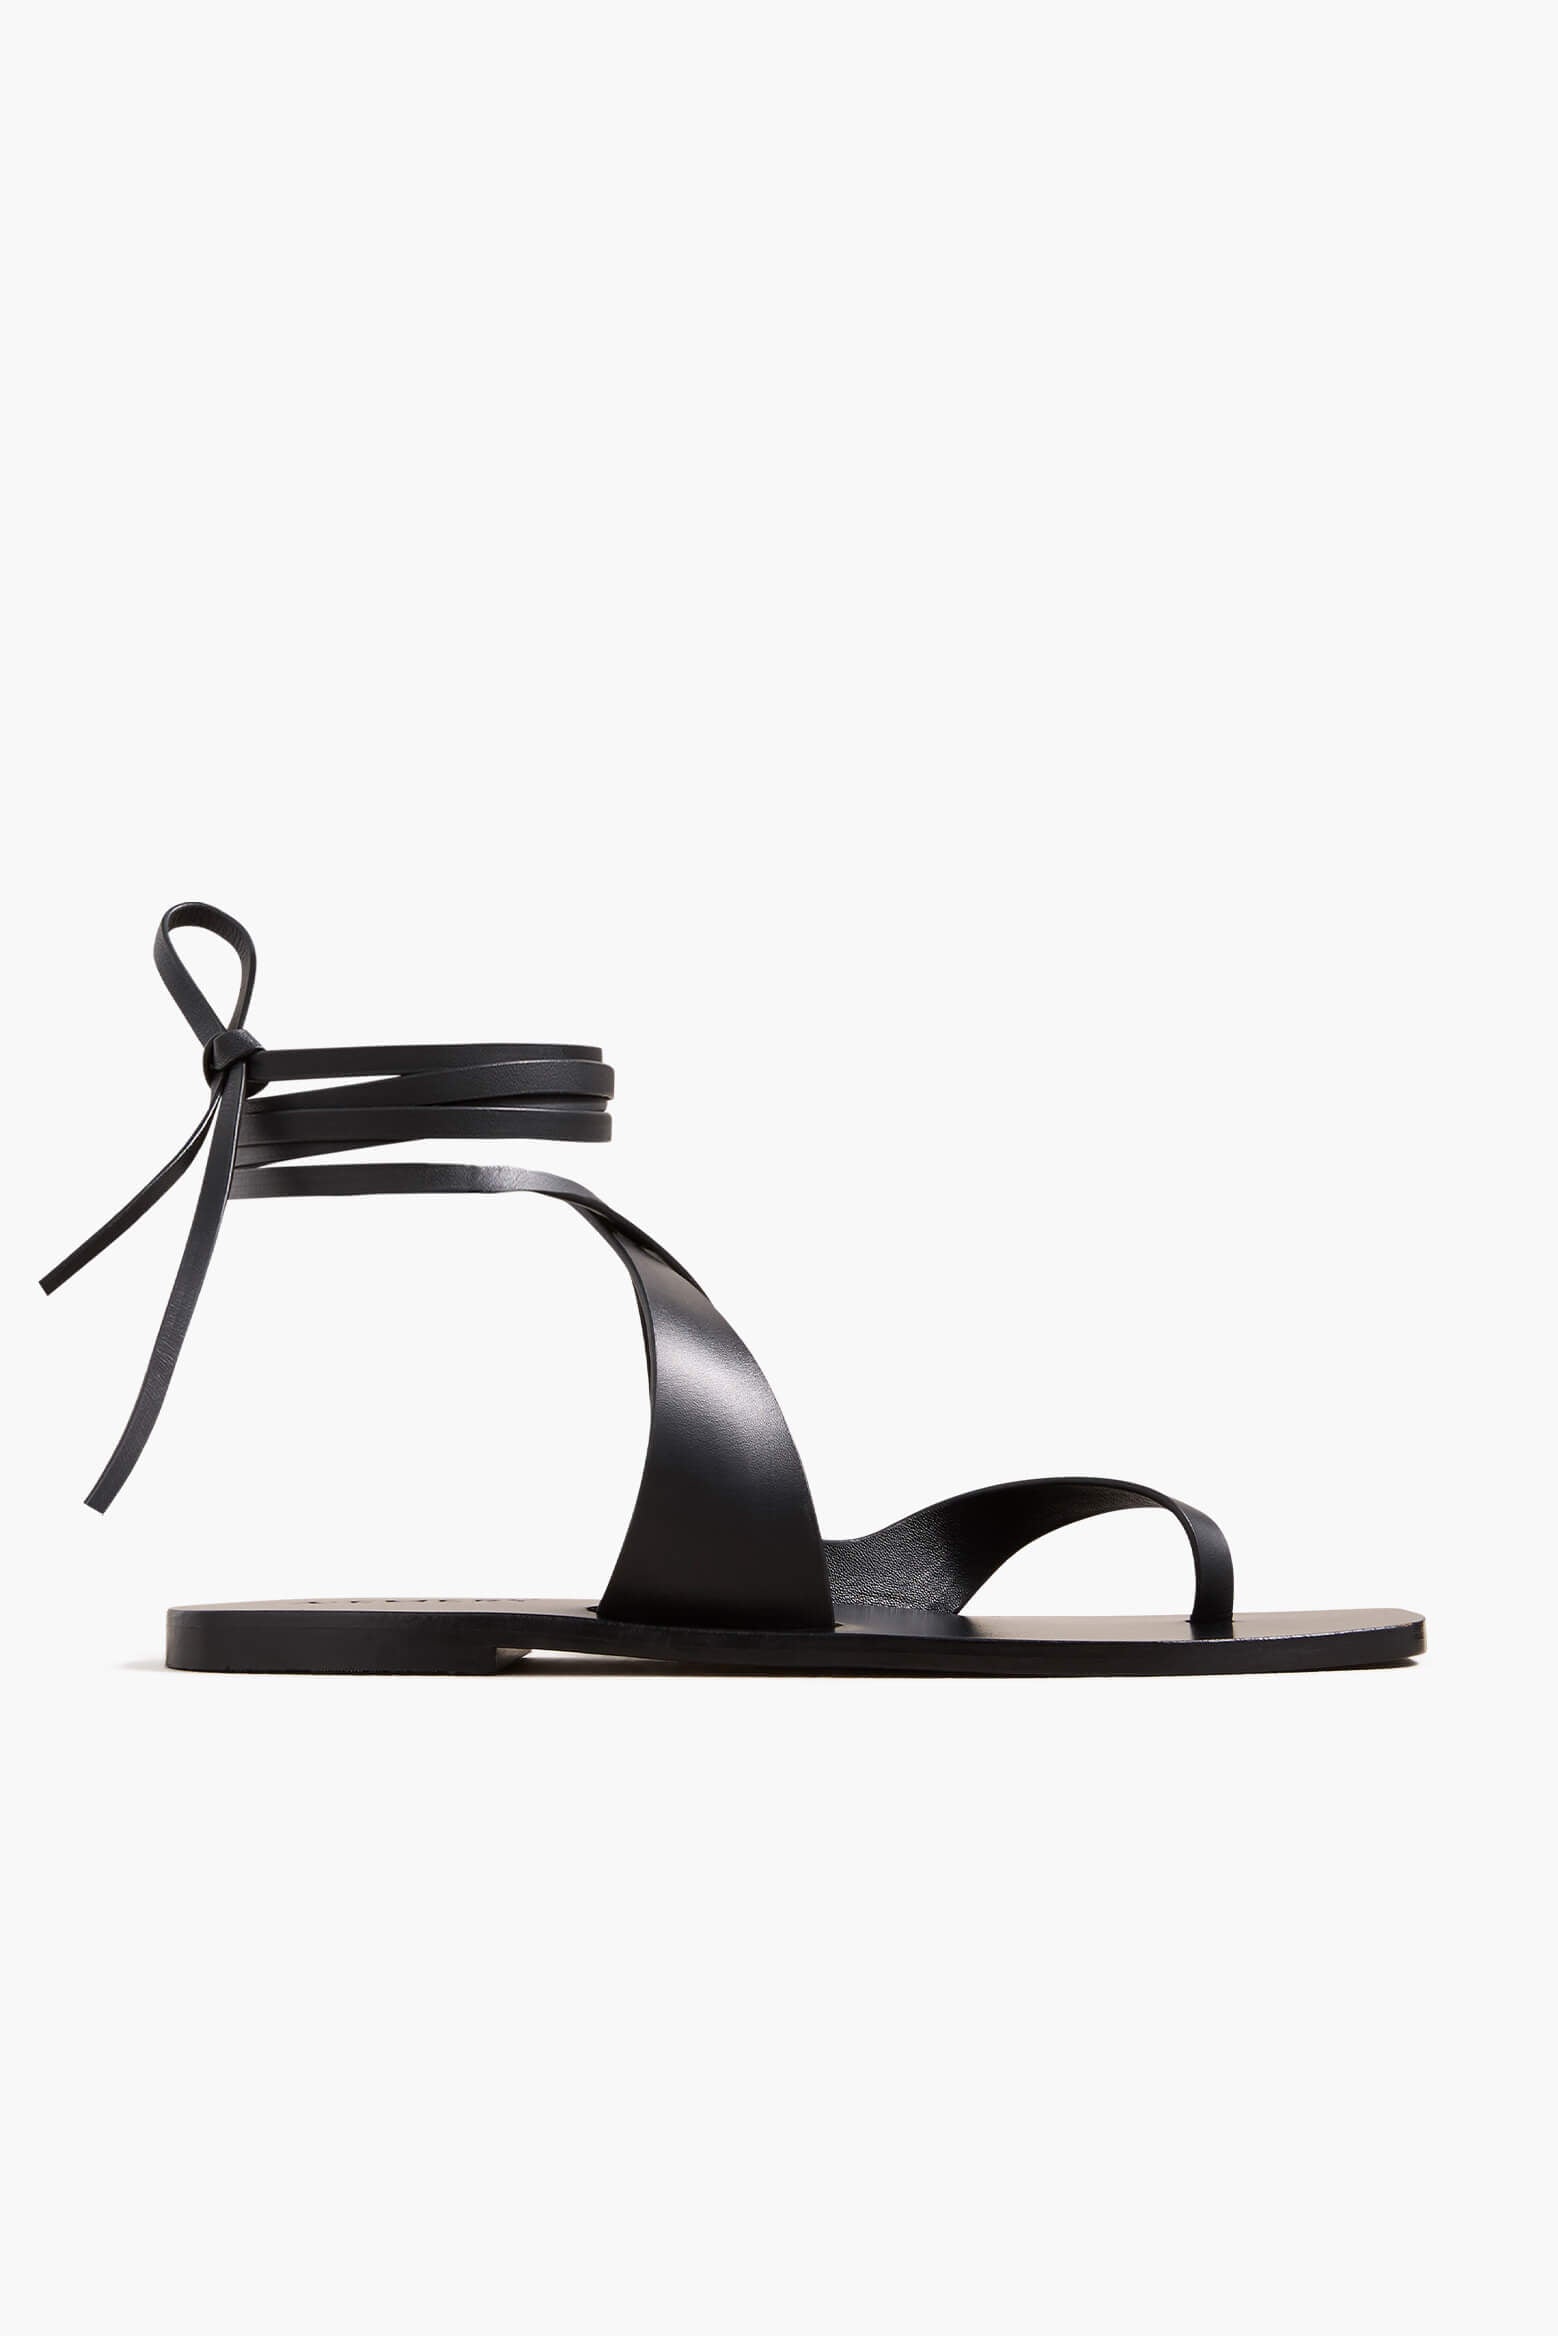 A.Emery Margaux Sandal in Black available at The New Trend Australia.